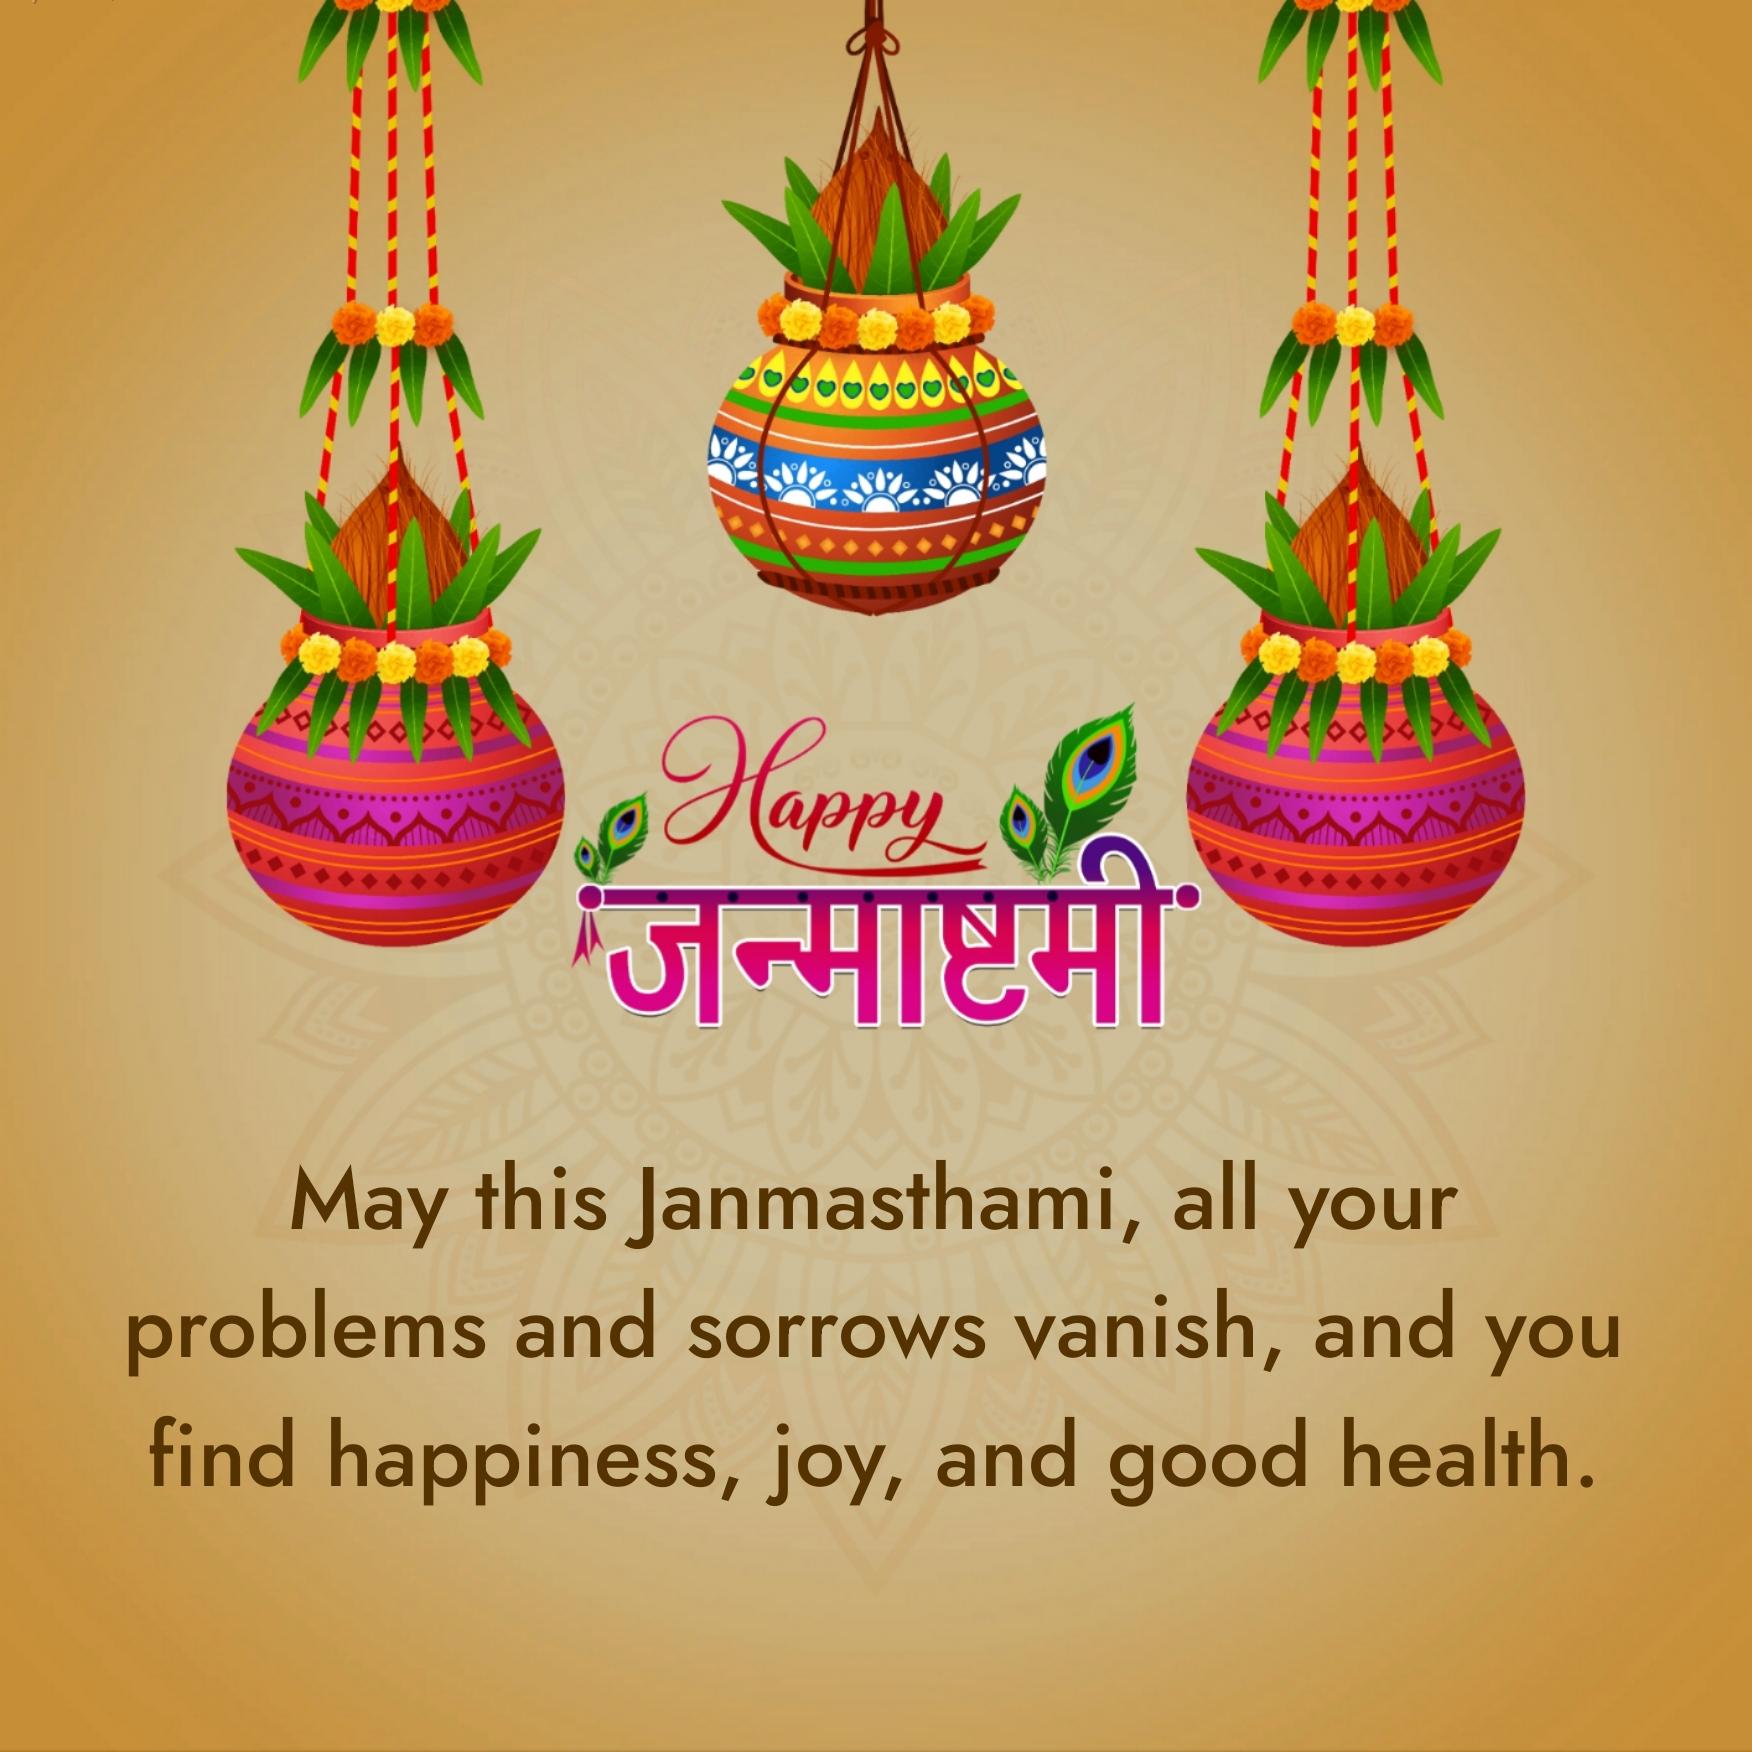 May this Janmasthami all your problems and sorrows vanish